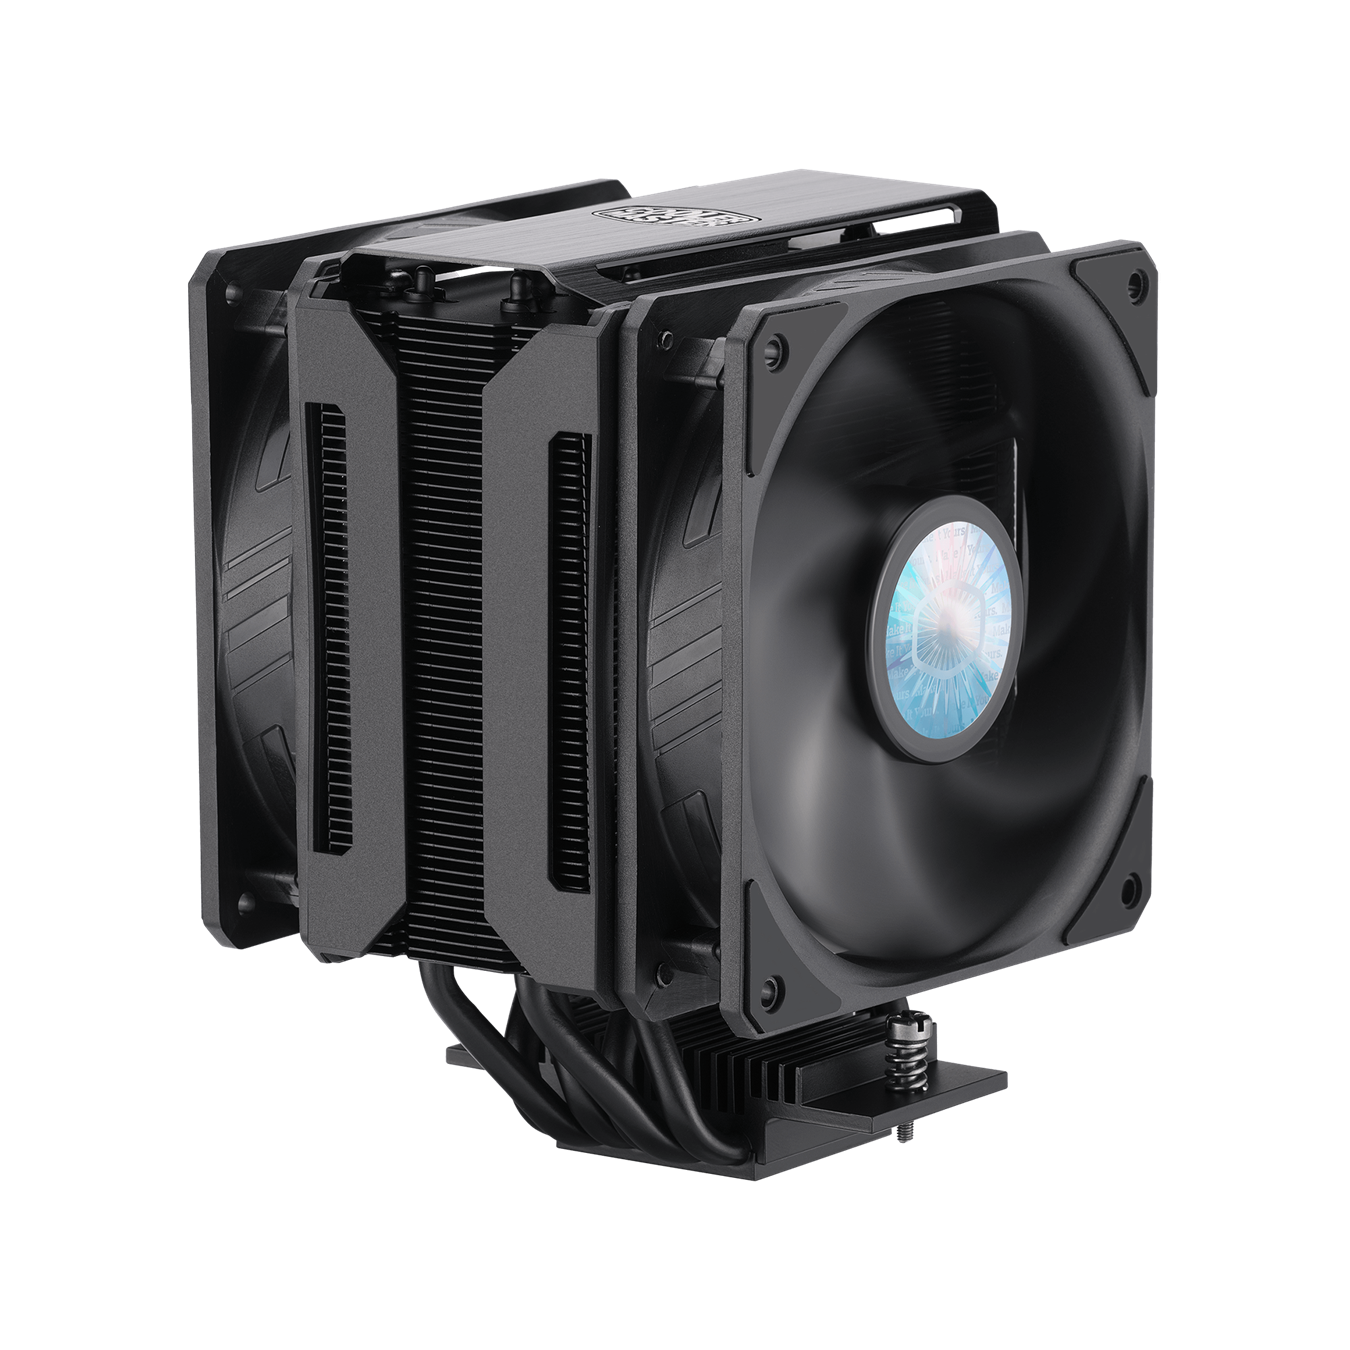 MasterAir MA612 Stealth - Featuring Cooler Master’s SickleFlow fan, redesigned blades deliver efficient airflow and pressure for superior Push-Pull performance